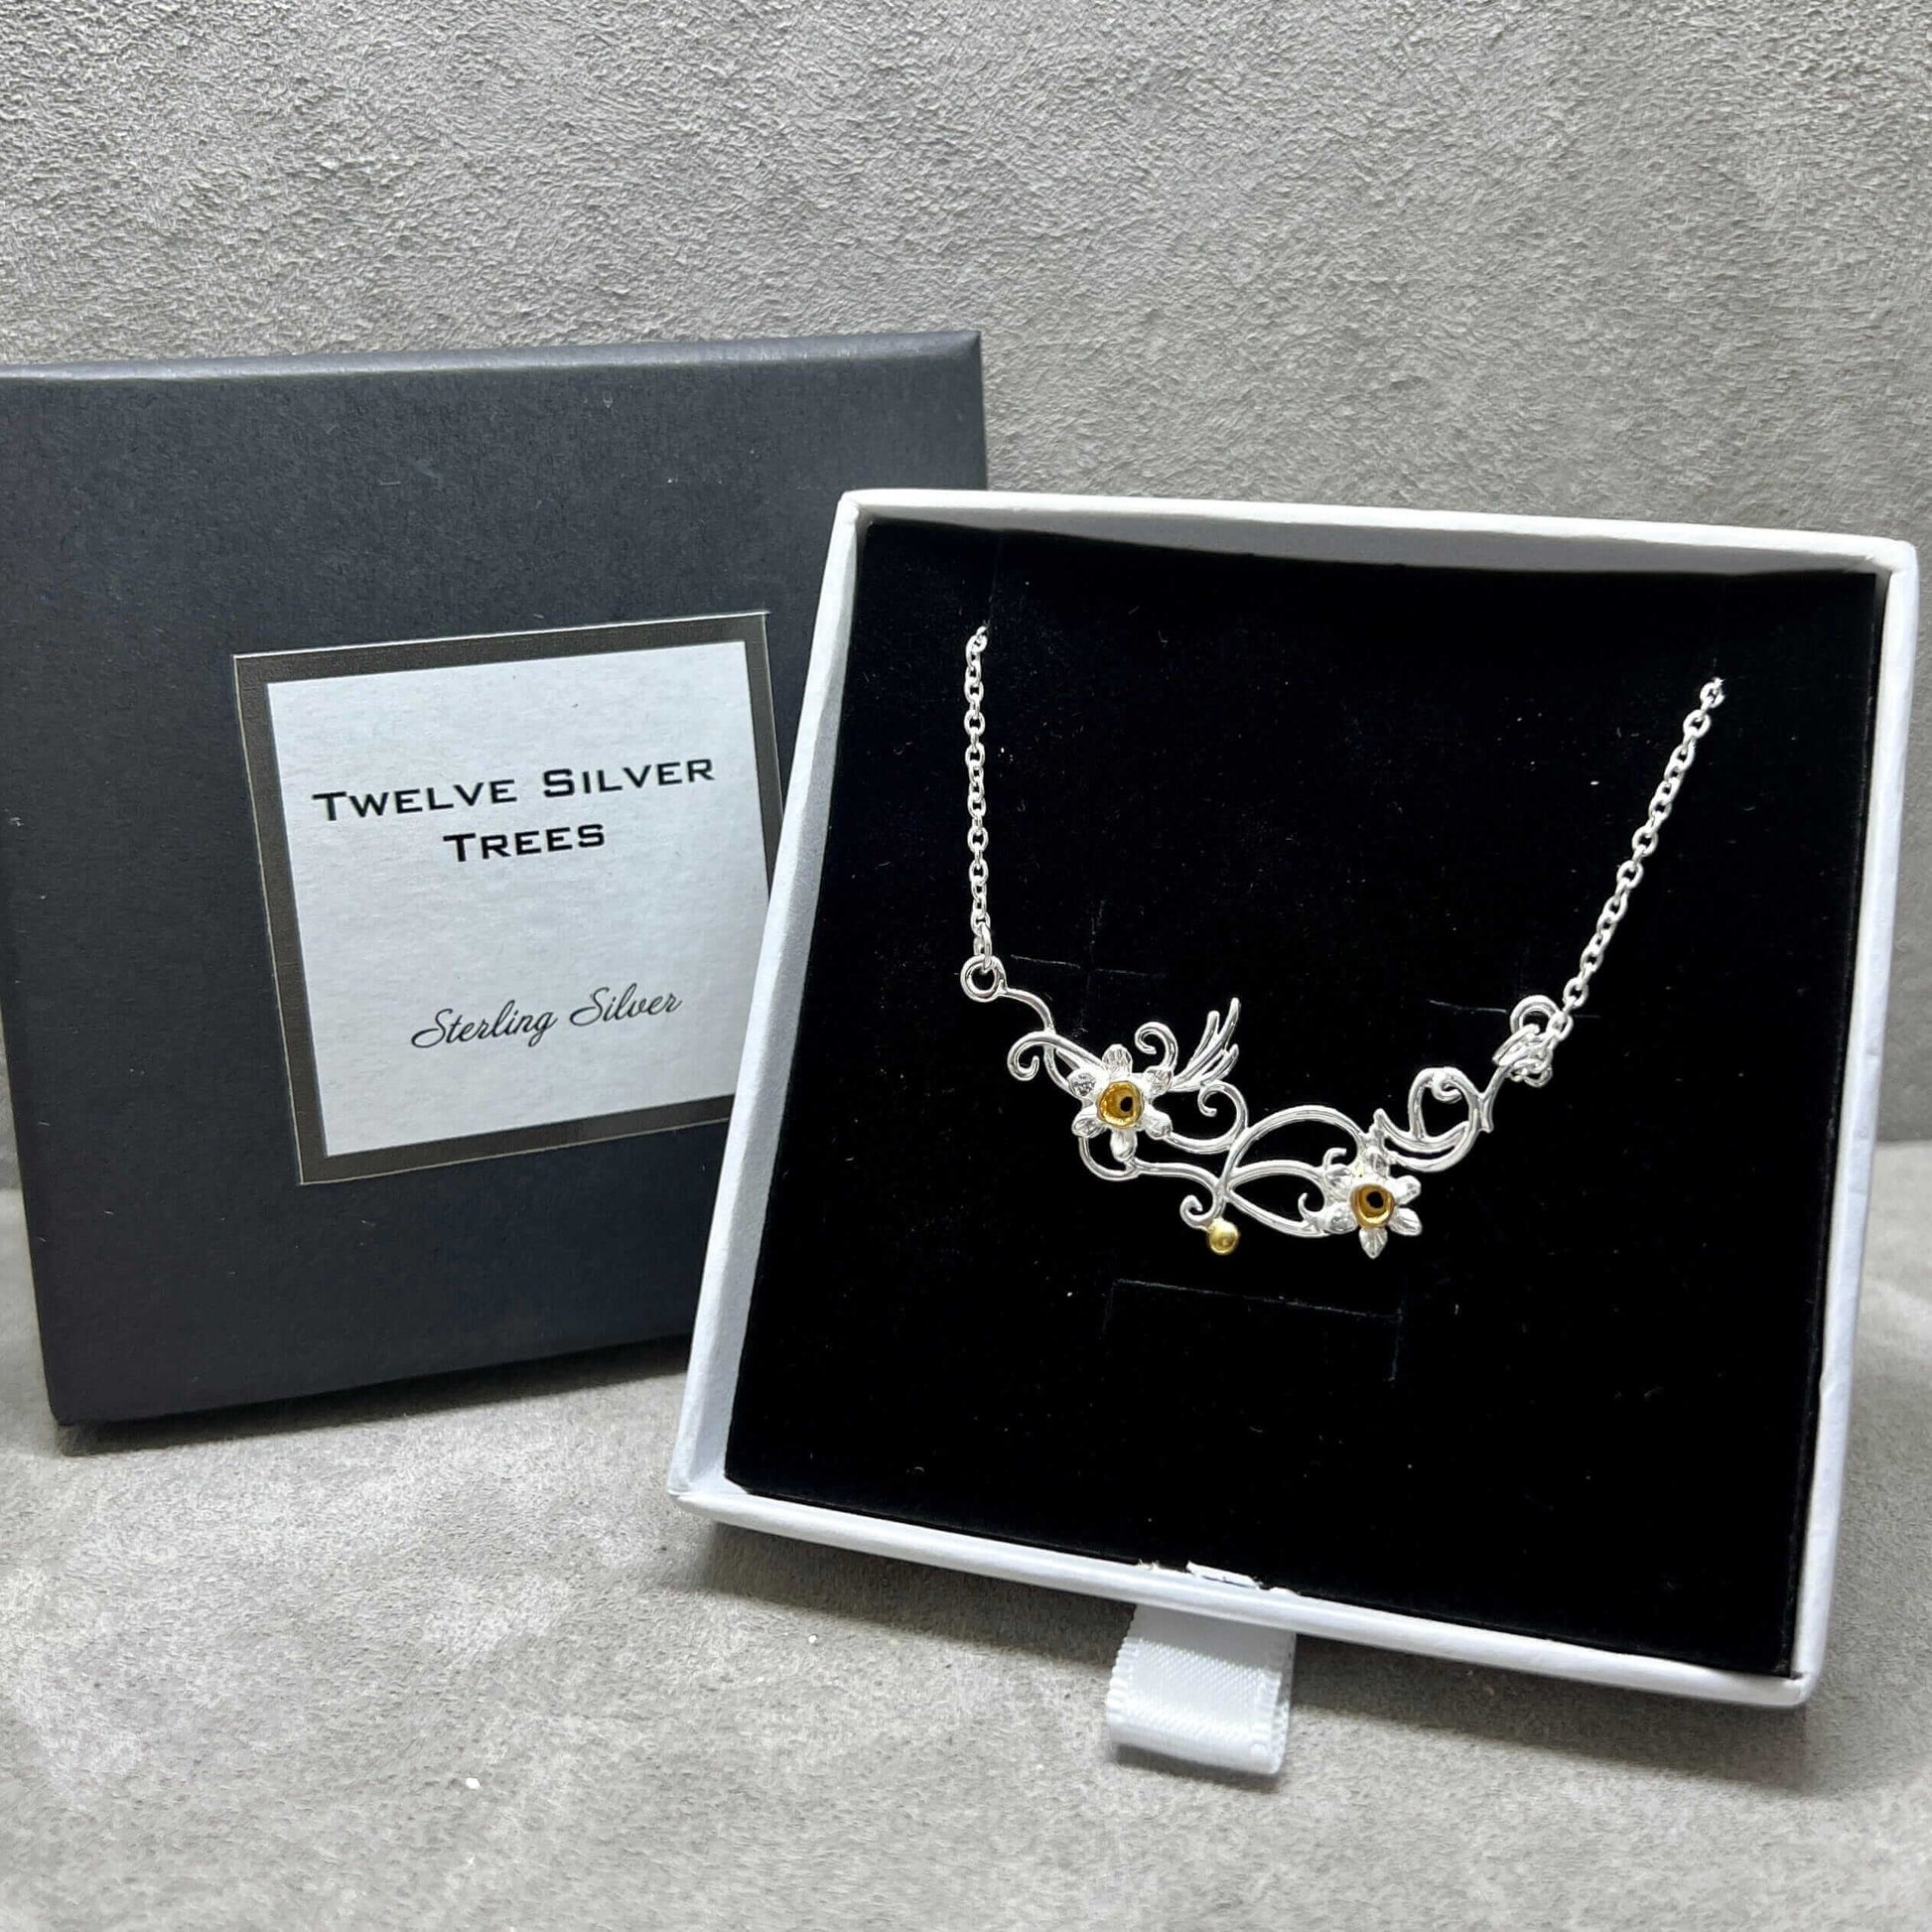 Daffodil Flower Necklace in Sterling Silver & 18 Carat Gold - Twelve Silver Trees